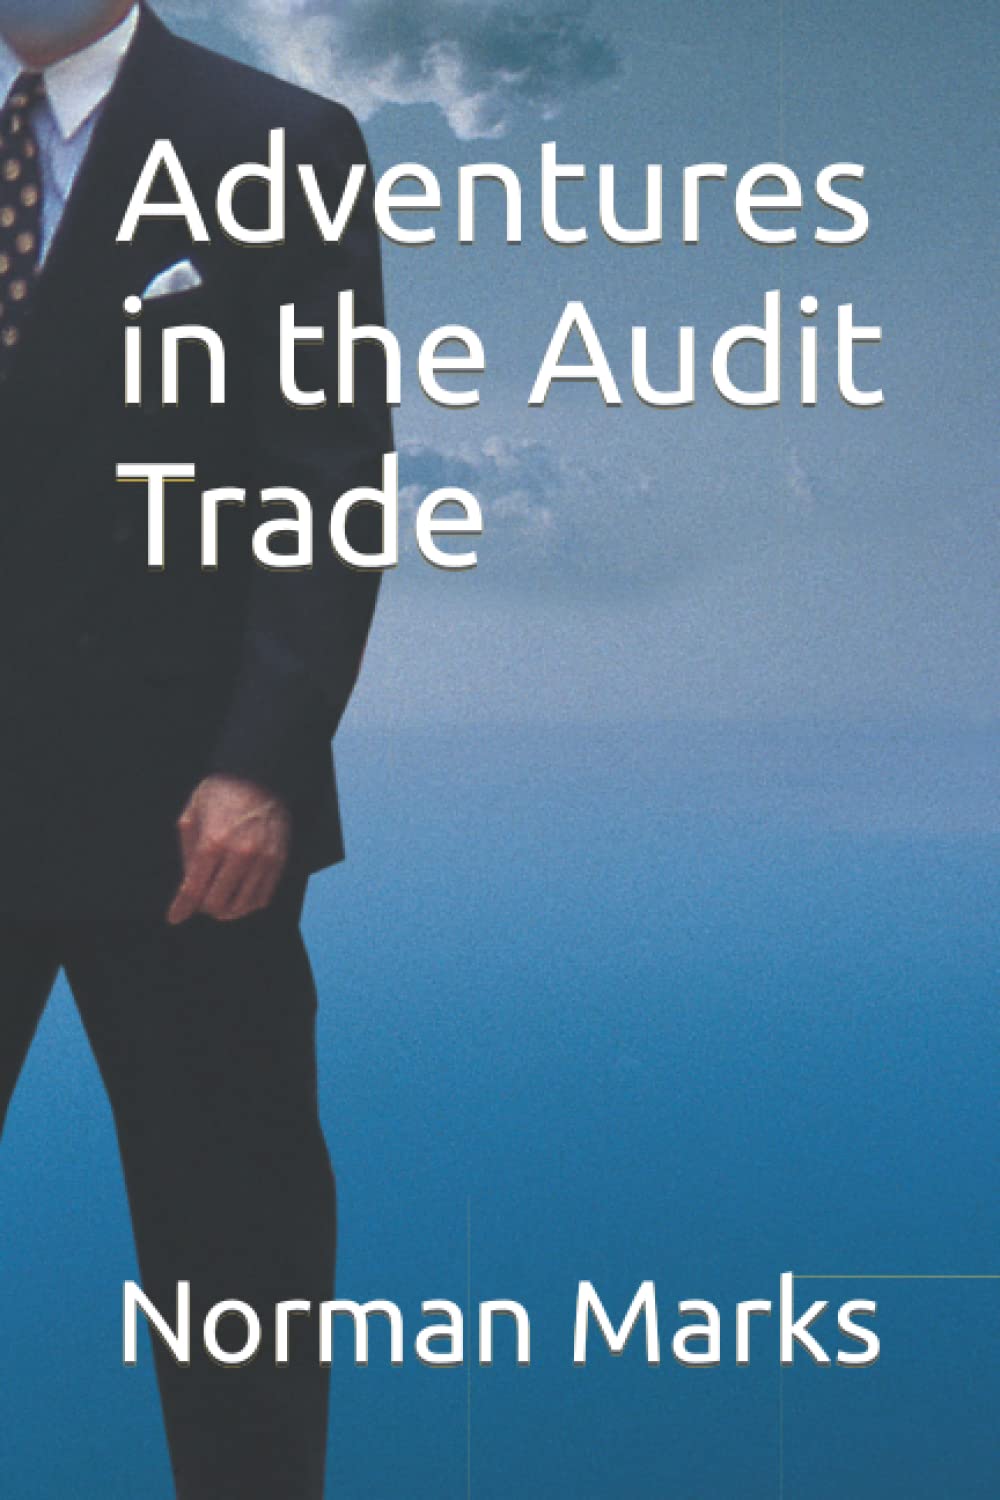 Adventures in the Audit Trade